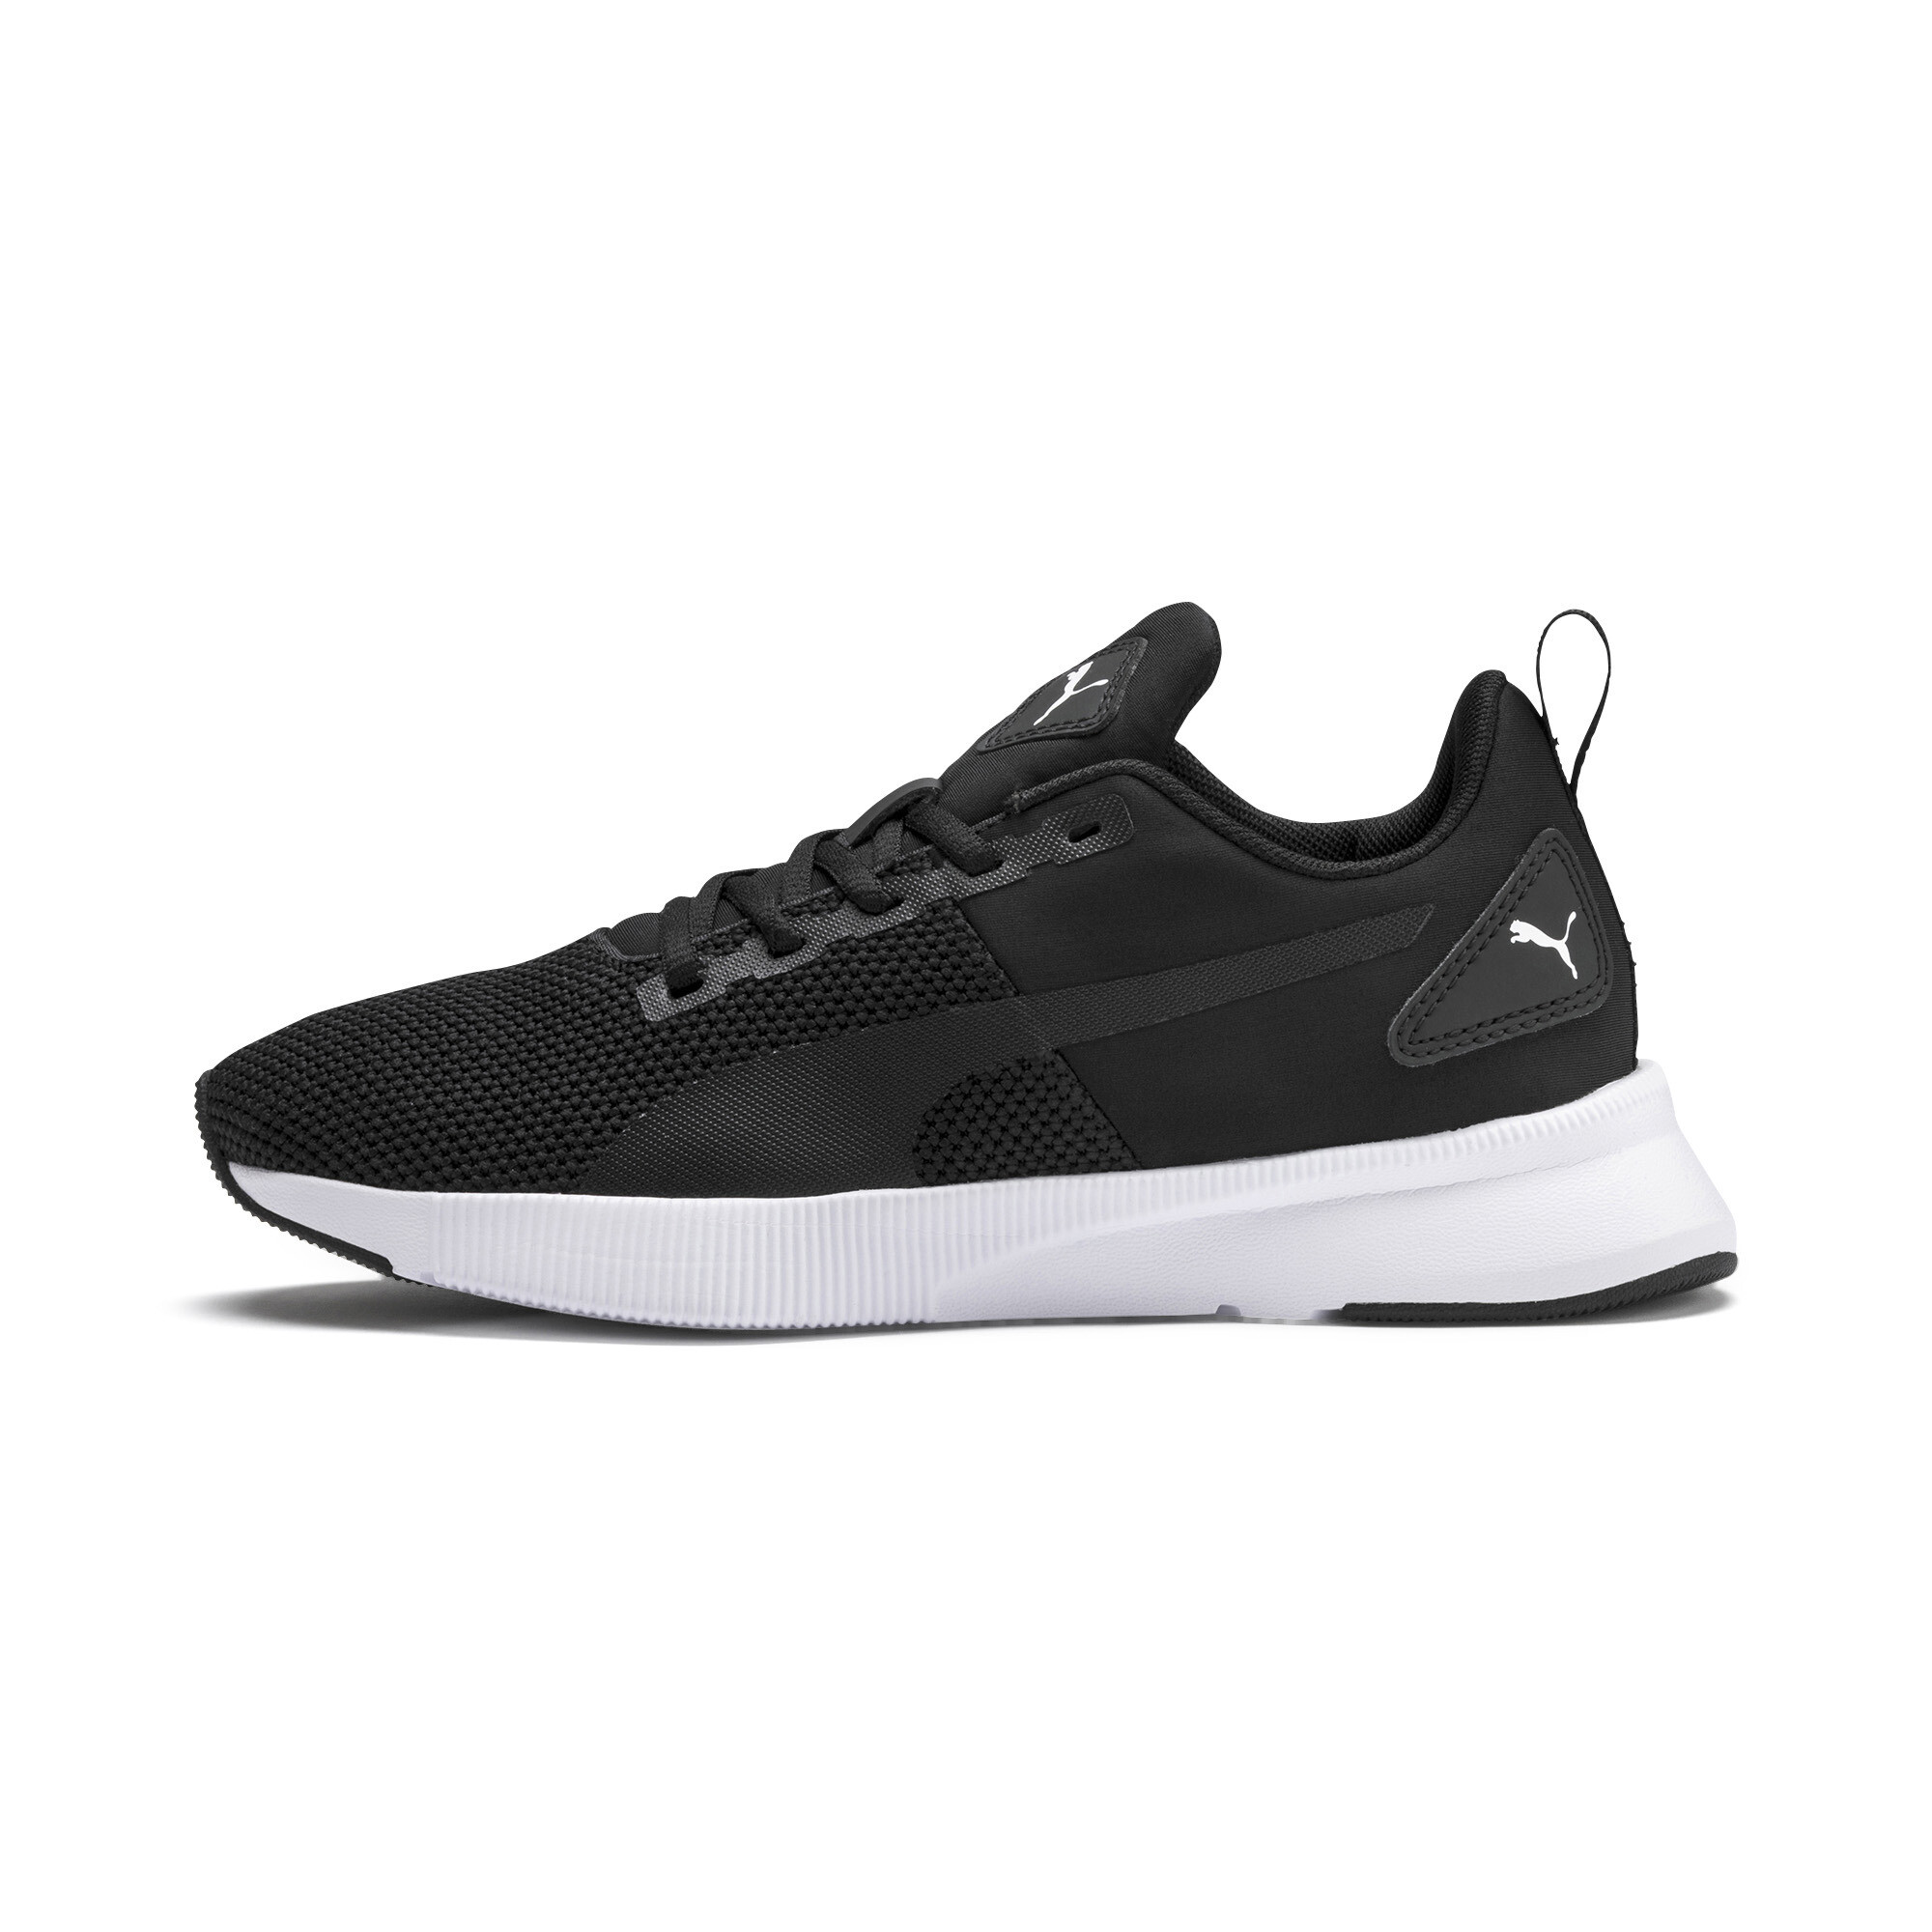 PUMA Flyer Runner Youth Trainers In 10 - Black, Size EU 36